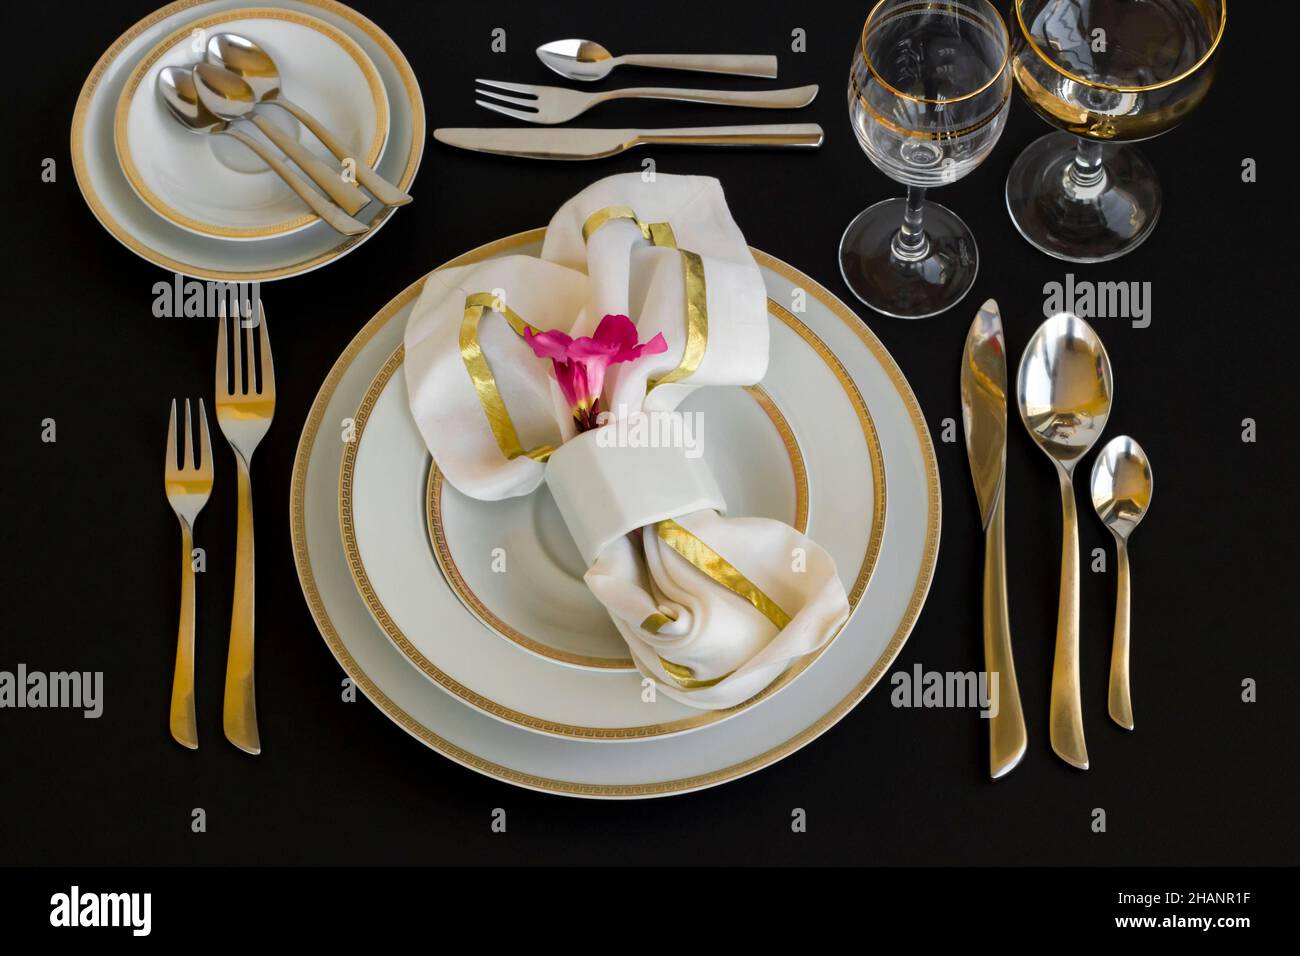 A stylish table without food was designed with elegant utensil on black surface. Stock Photo